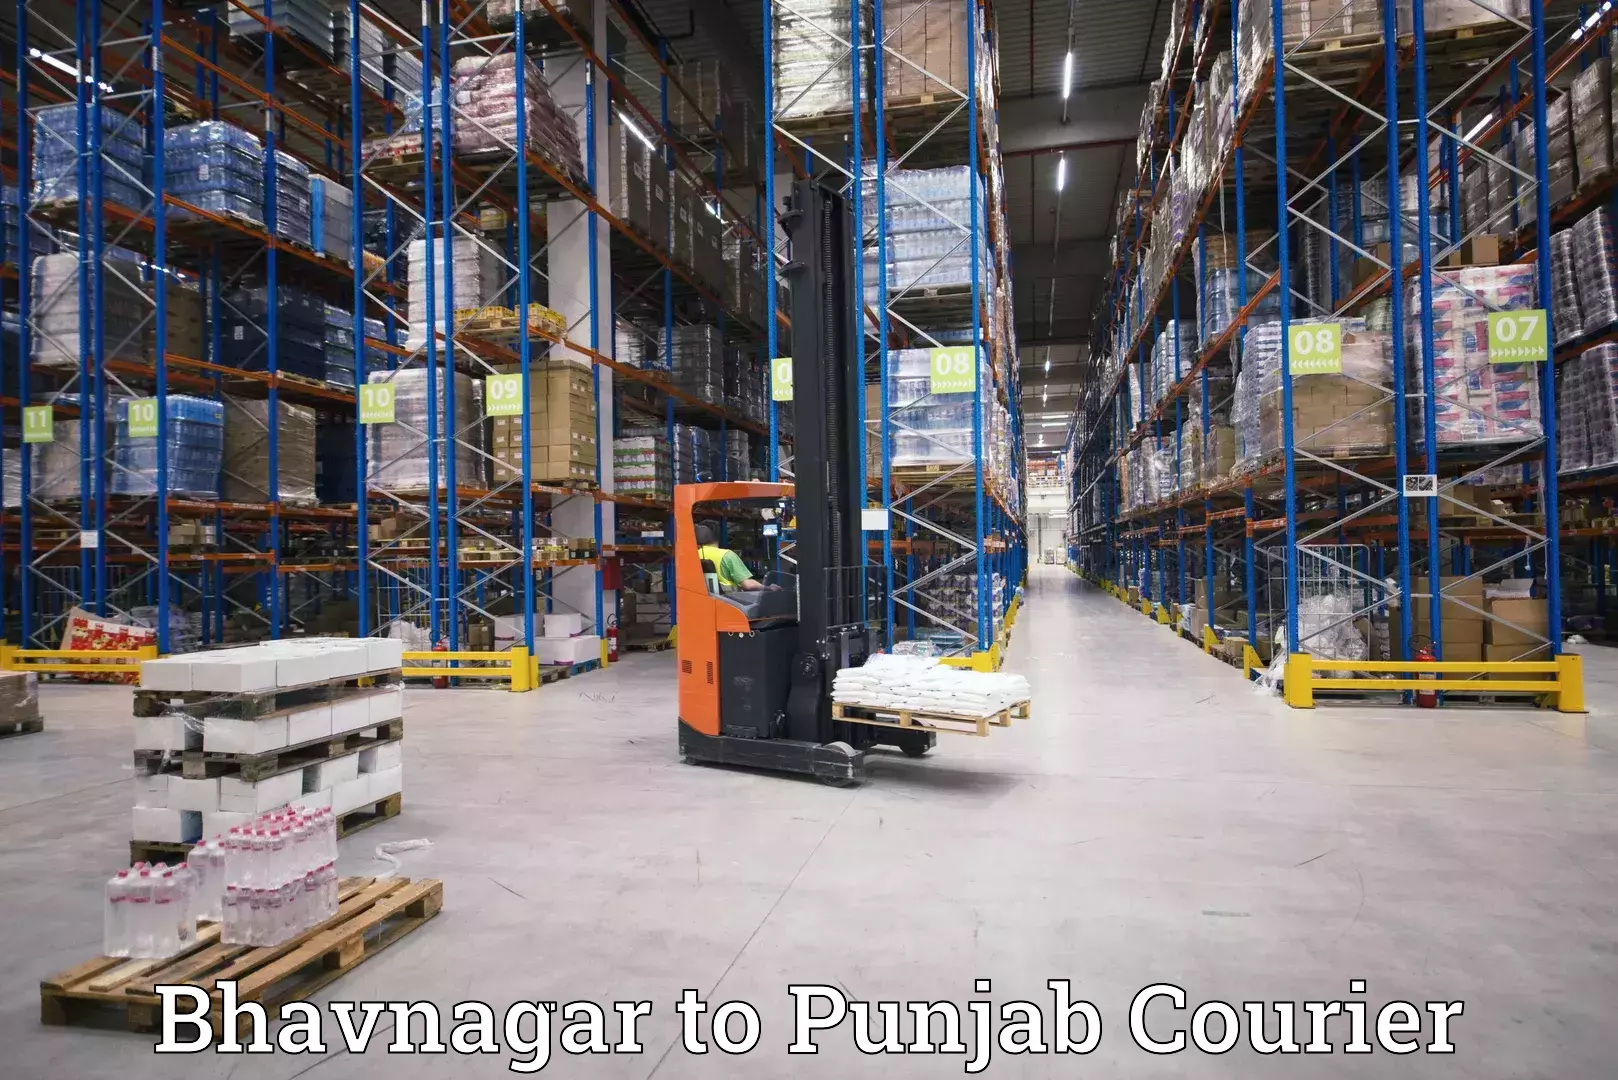 Package delivery network Bhavnagar to Faridkot